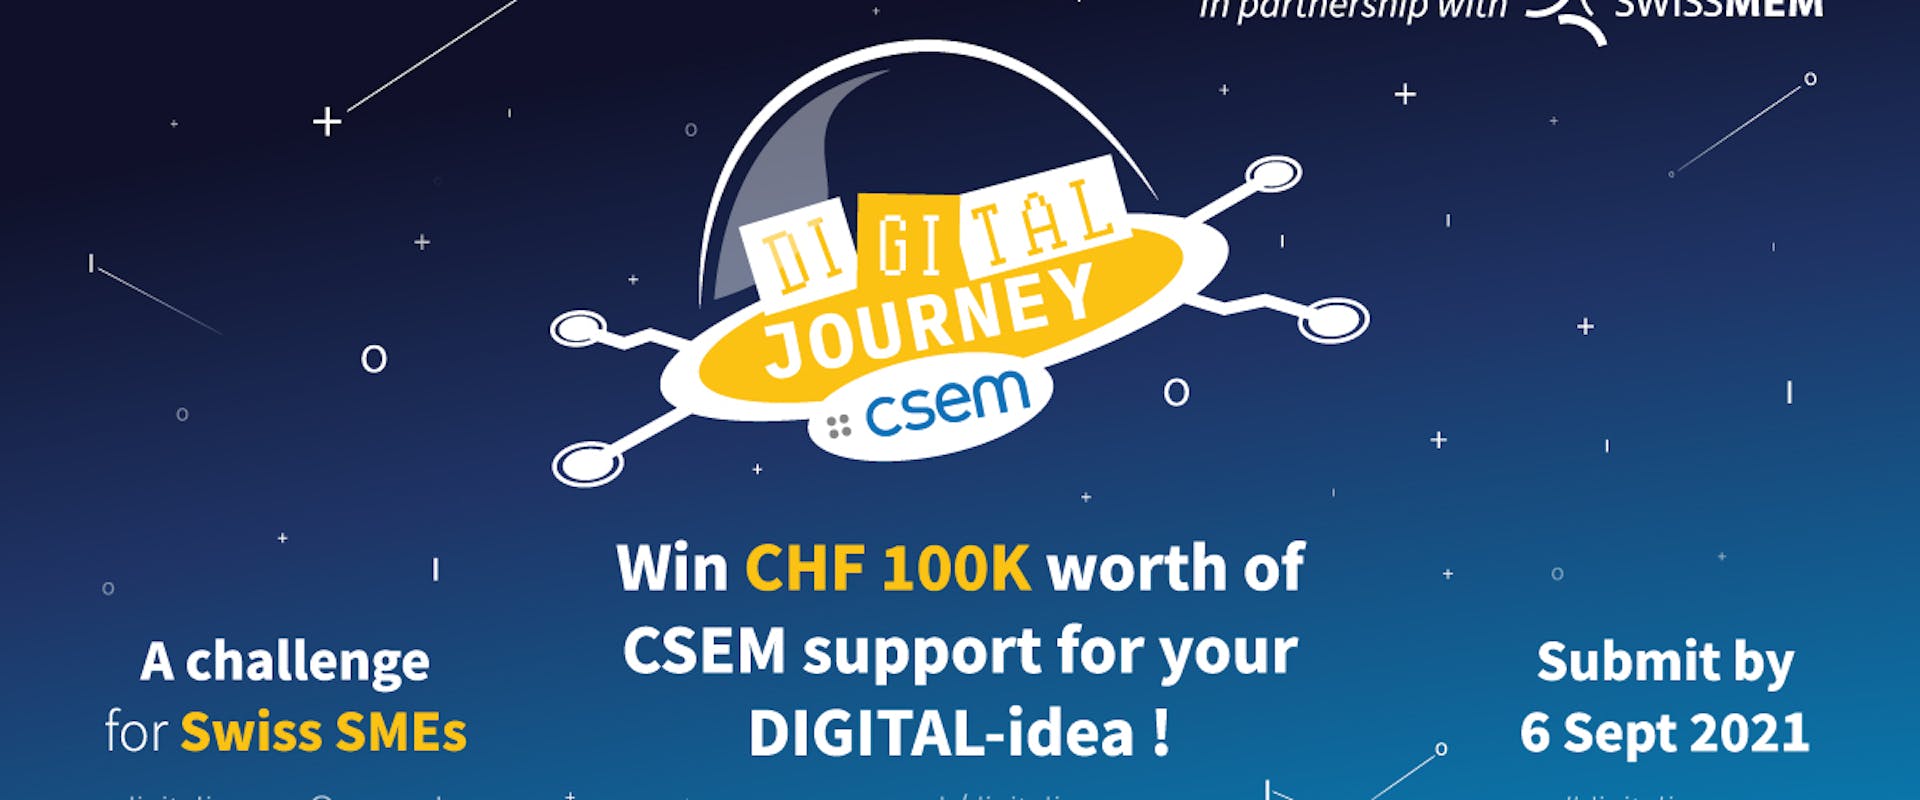 CSEM will award CHF 200,000 in digital-development support to two Swiss SMEs